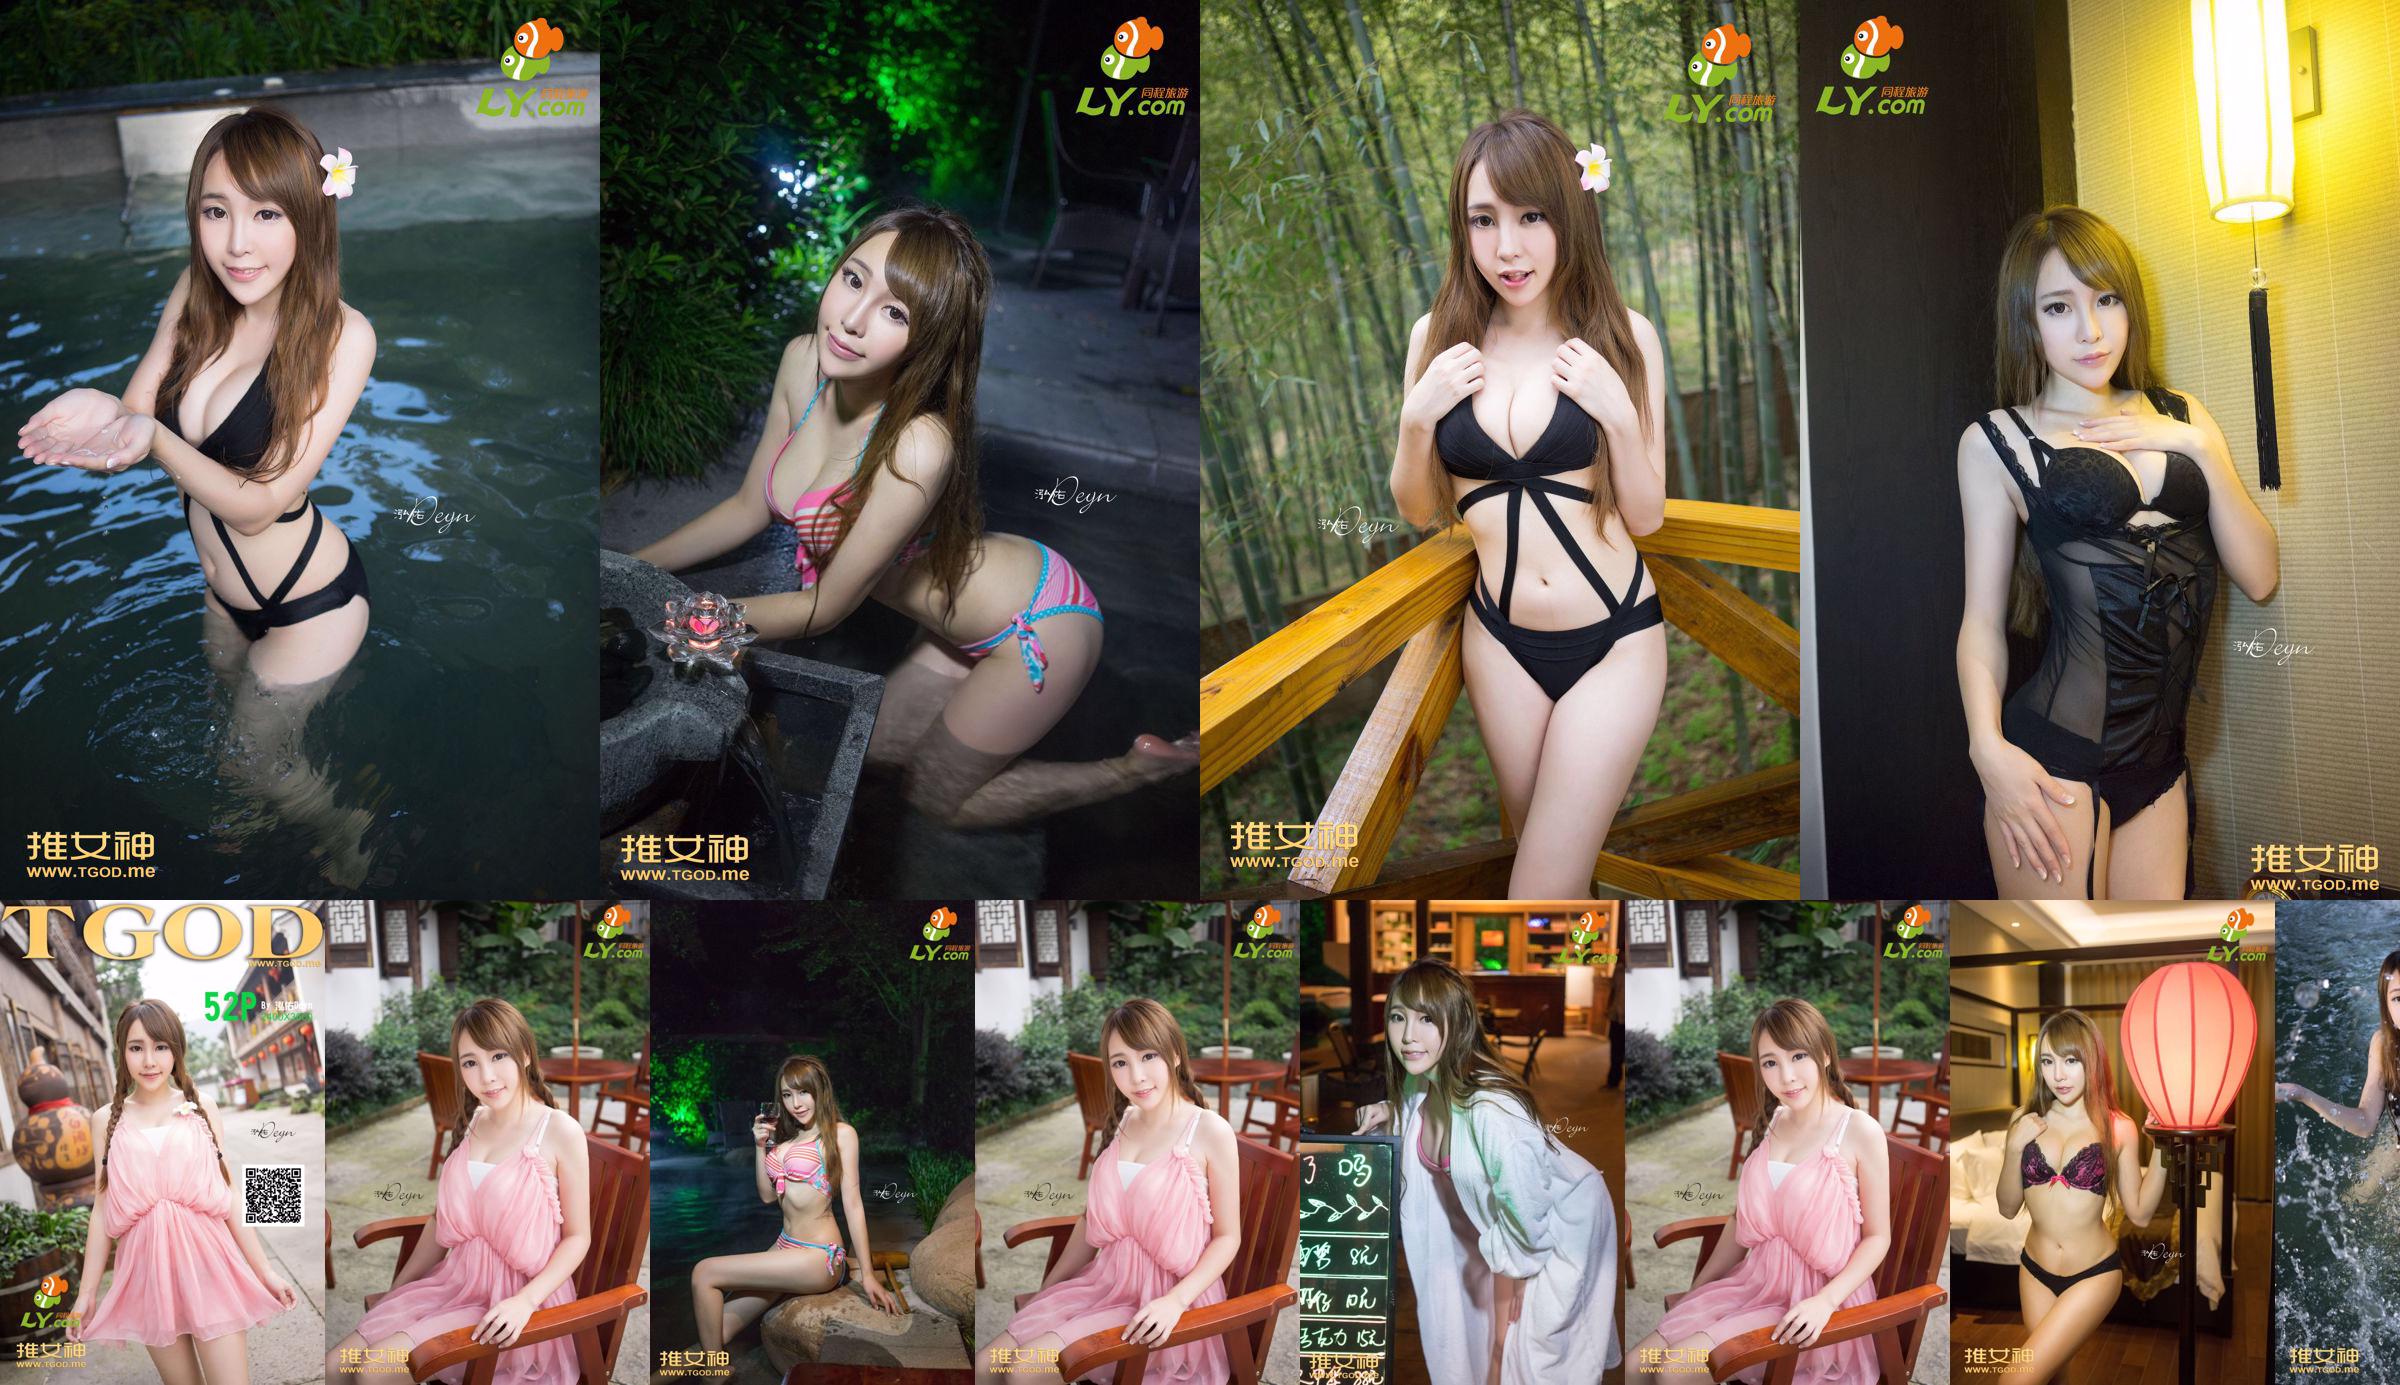 Huang Mengxian "Where Is the Goddess Going Issue 7" [TGOD Push Goddess] No.f215bd Pagina 1